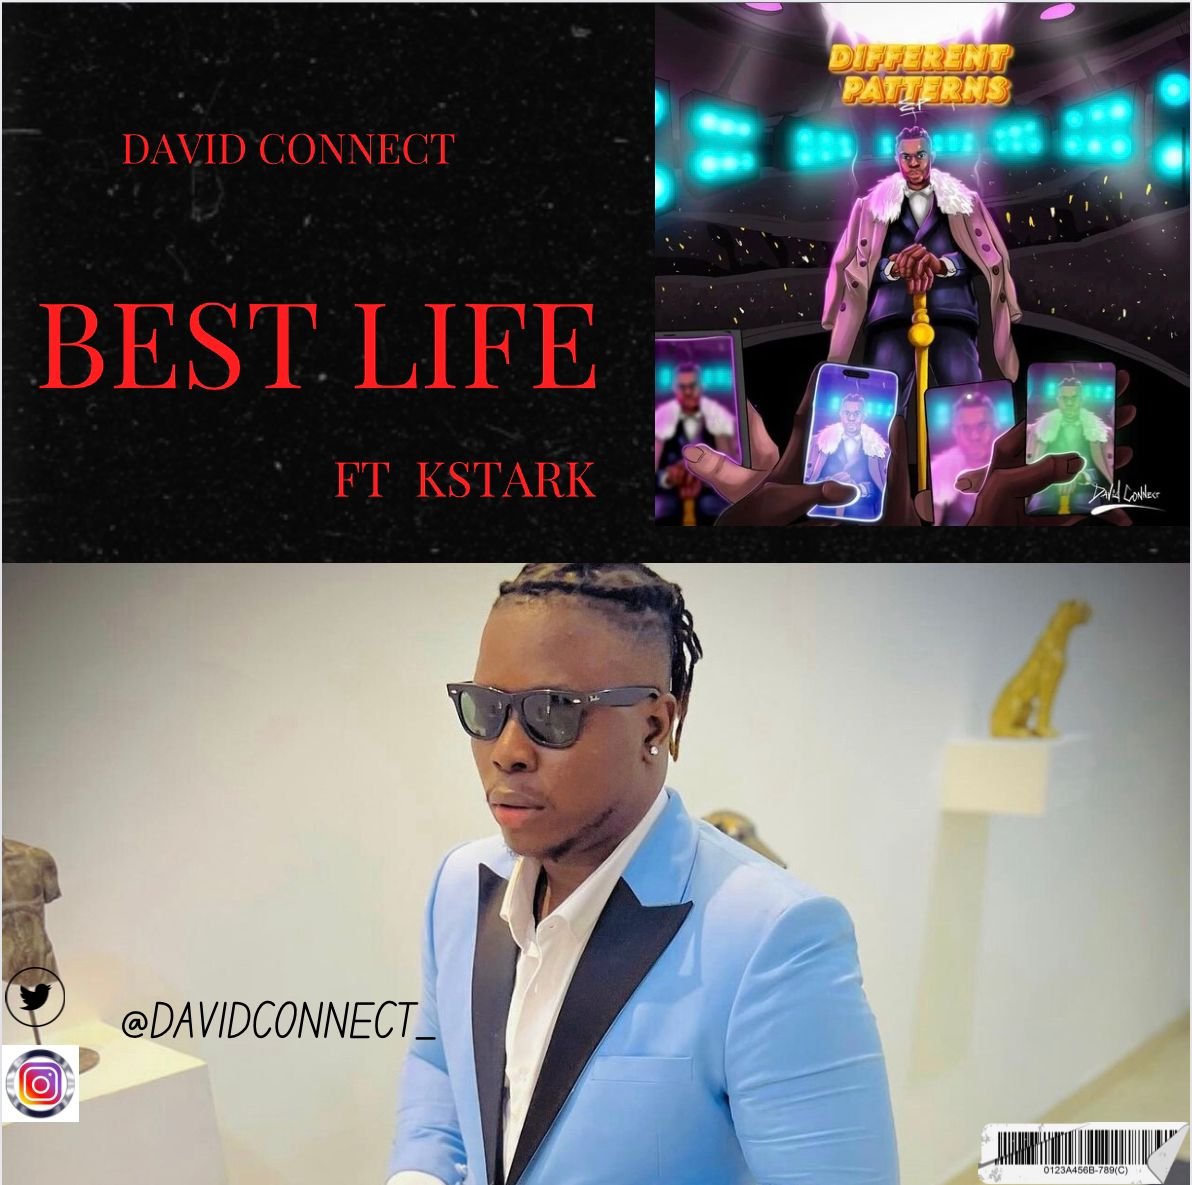 Live with @SarahAdesanya1 ▶️ BEST LIFE BY @davidconnect_ Listen live anywhere in the world trafficradio961.ng Your #LateNightTrafficShow Host is here. Have fun